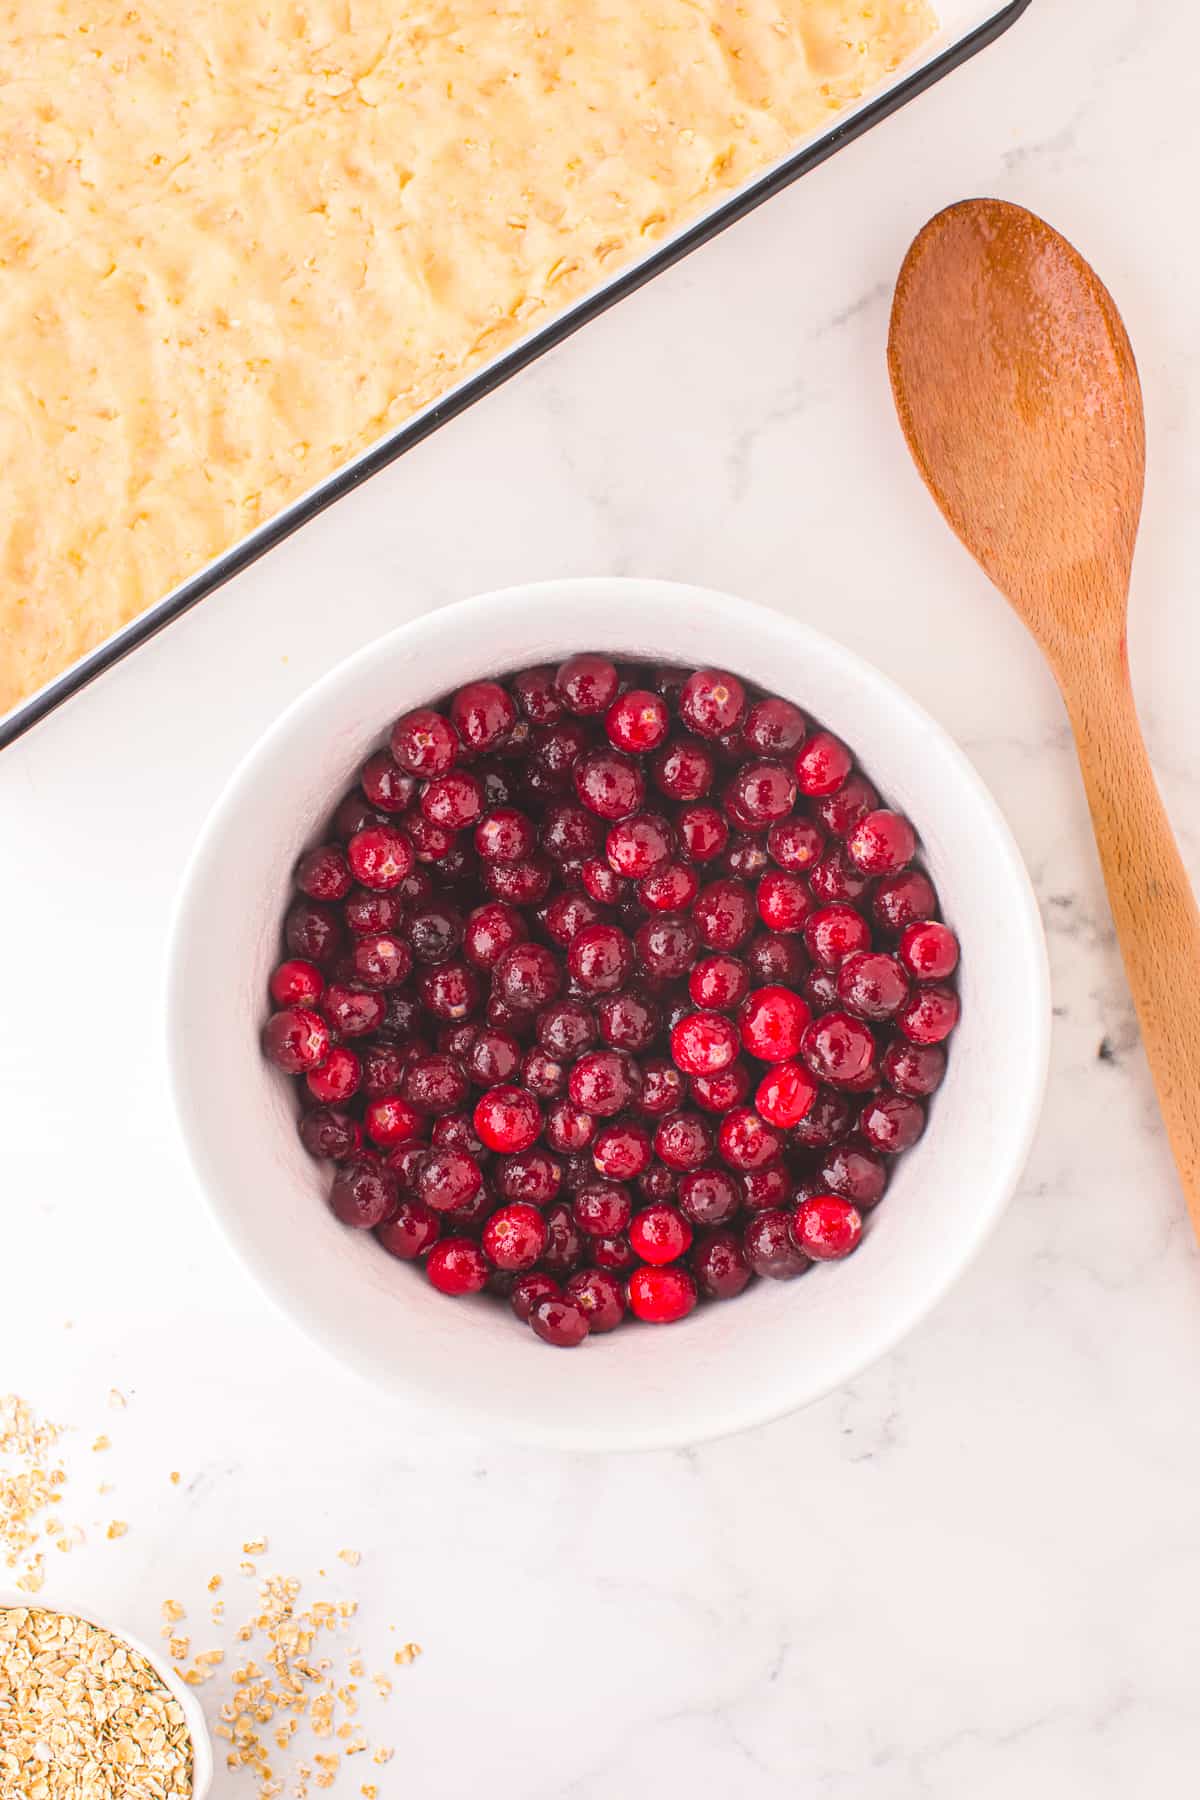 Cranberries in a large bowl mixed with other liquid ingredients from overhead on a counter with a wooden spoon and a large pan with the dough pressed into the bottom on the counter nearby.